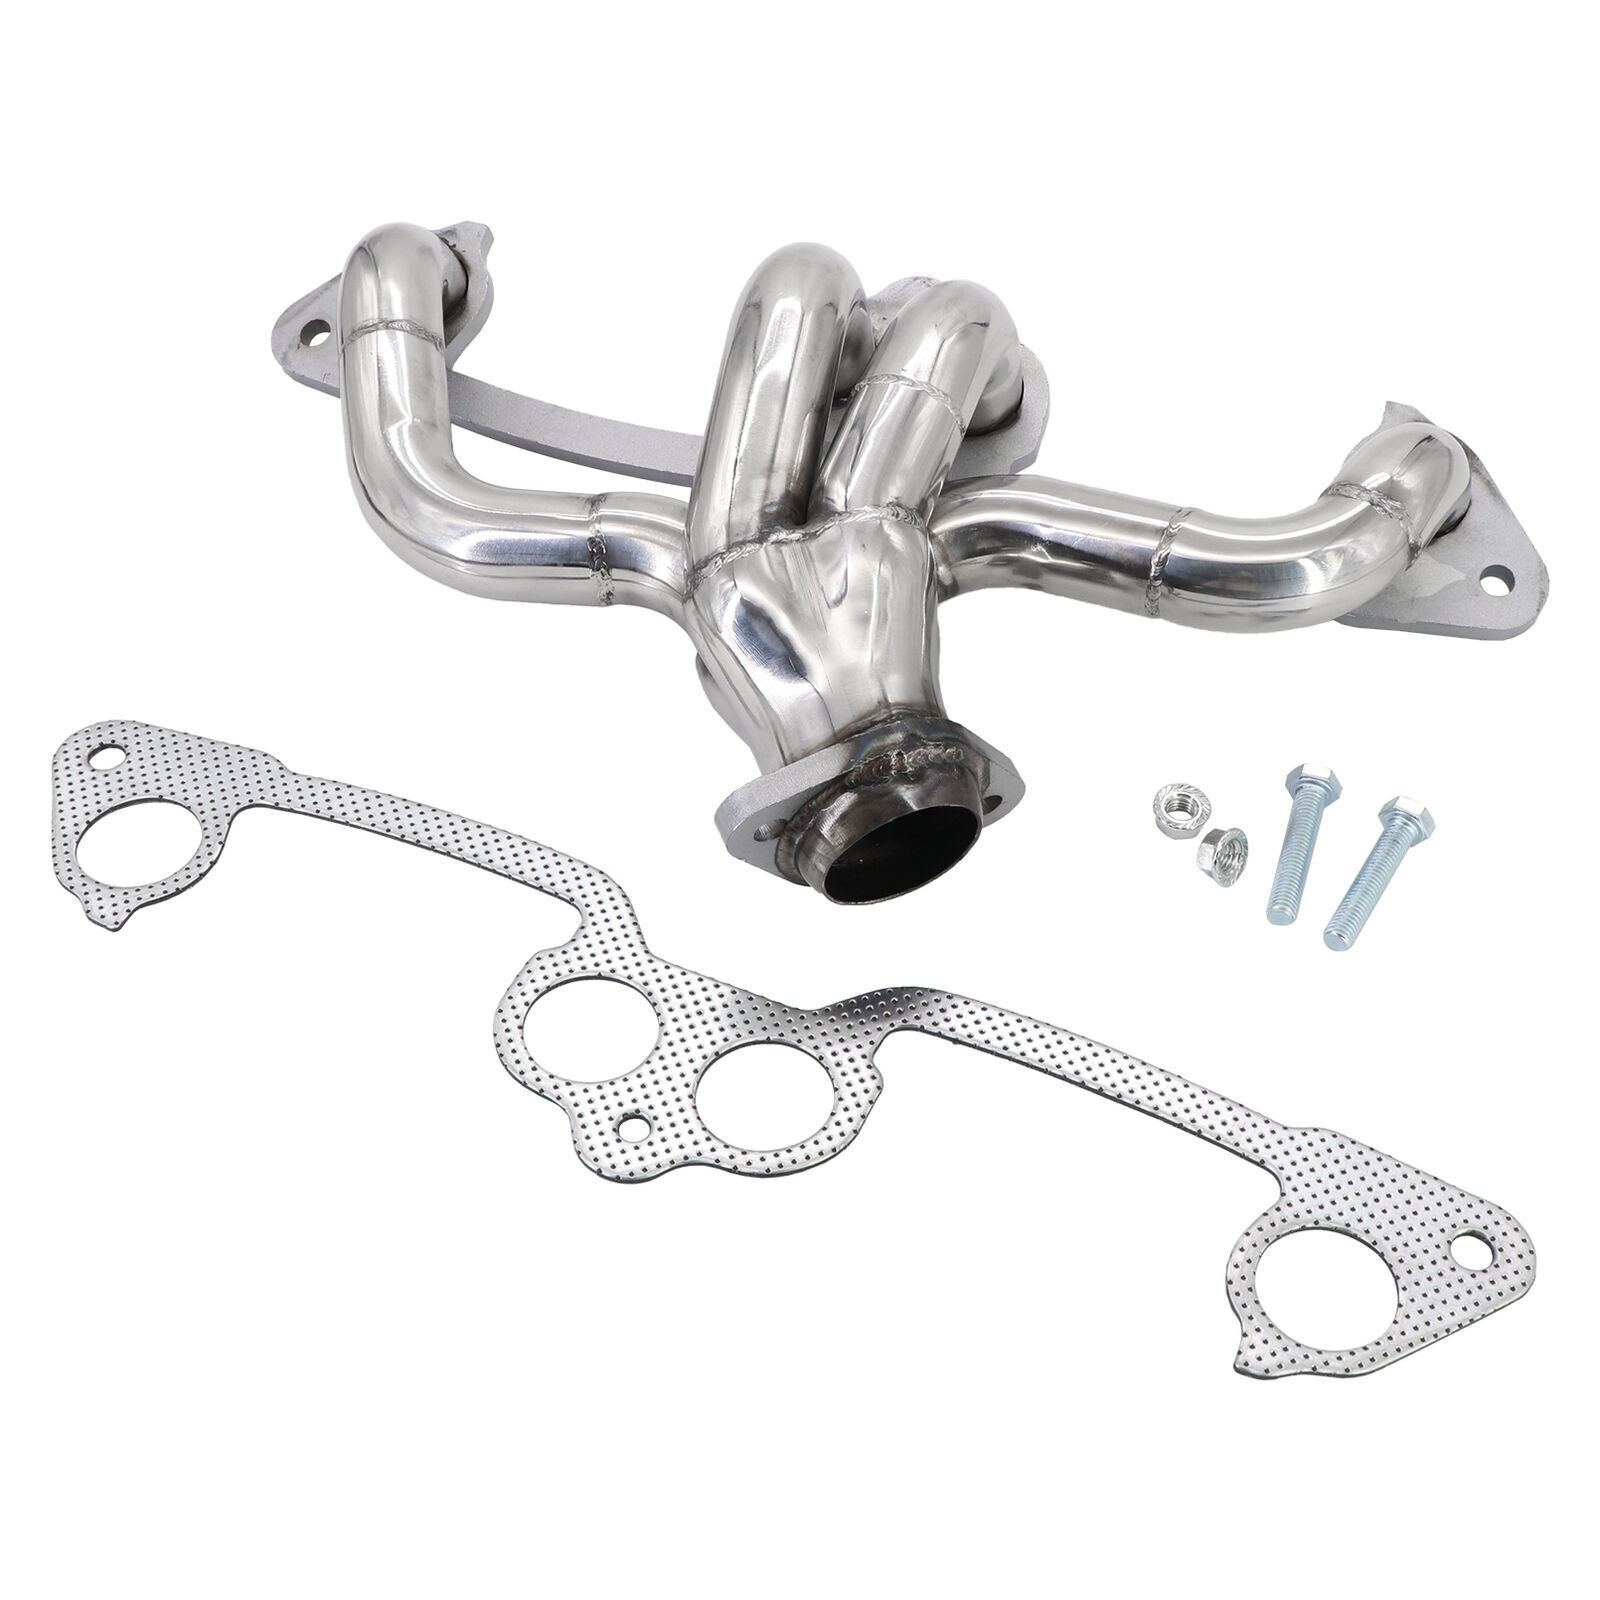 Stainless Steel Manifold Header for 1991-2002 Jeep Wrangler 2.5 2.5l TJ 